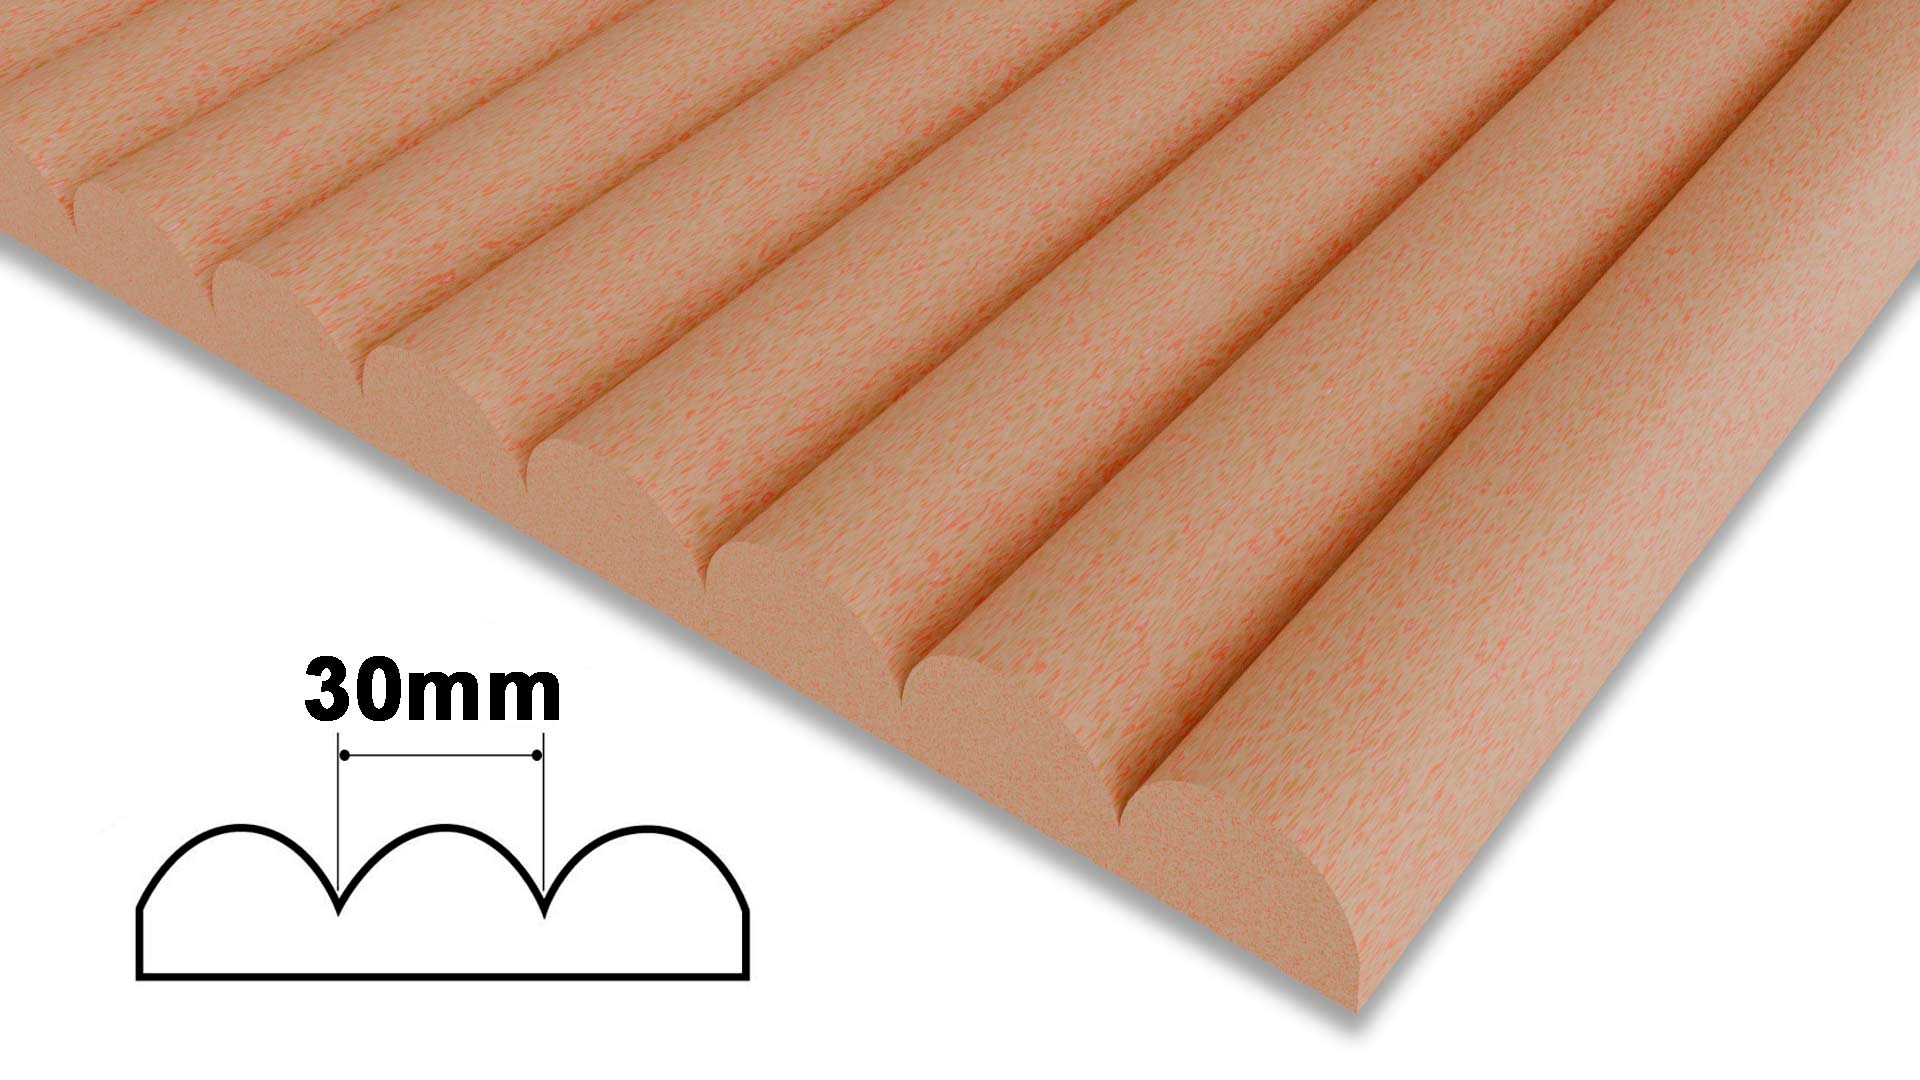 Ribbed Fire Rated MDF Panels - Ribs Width 30mm